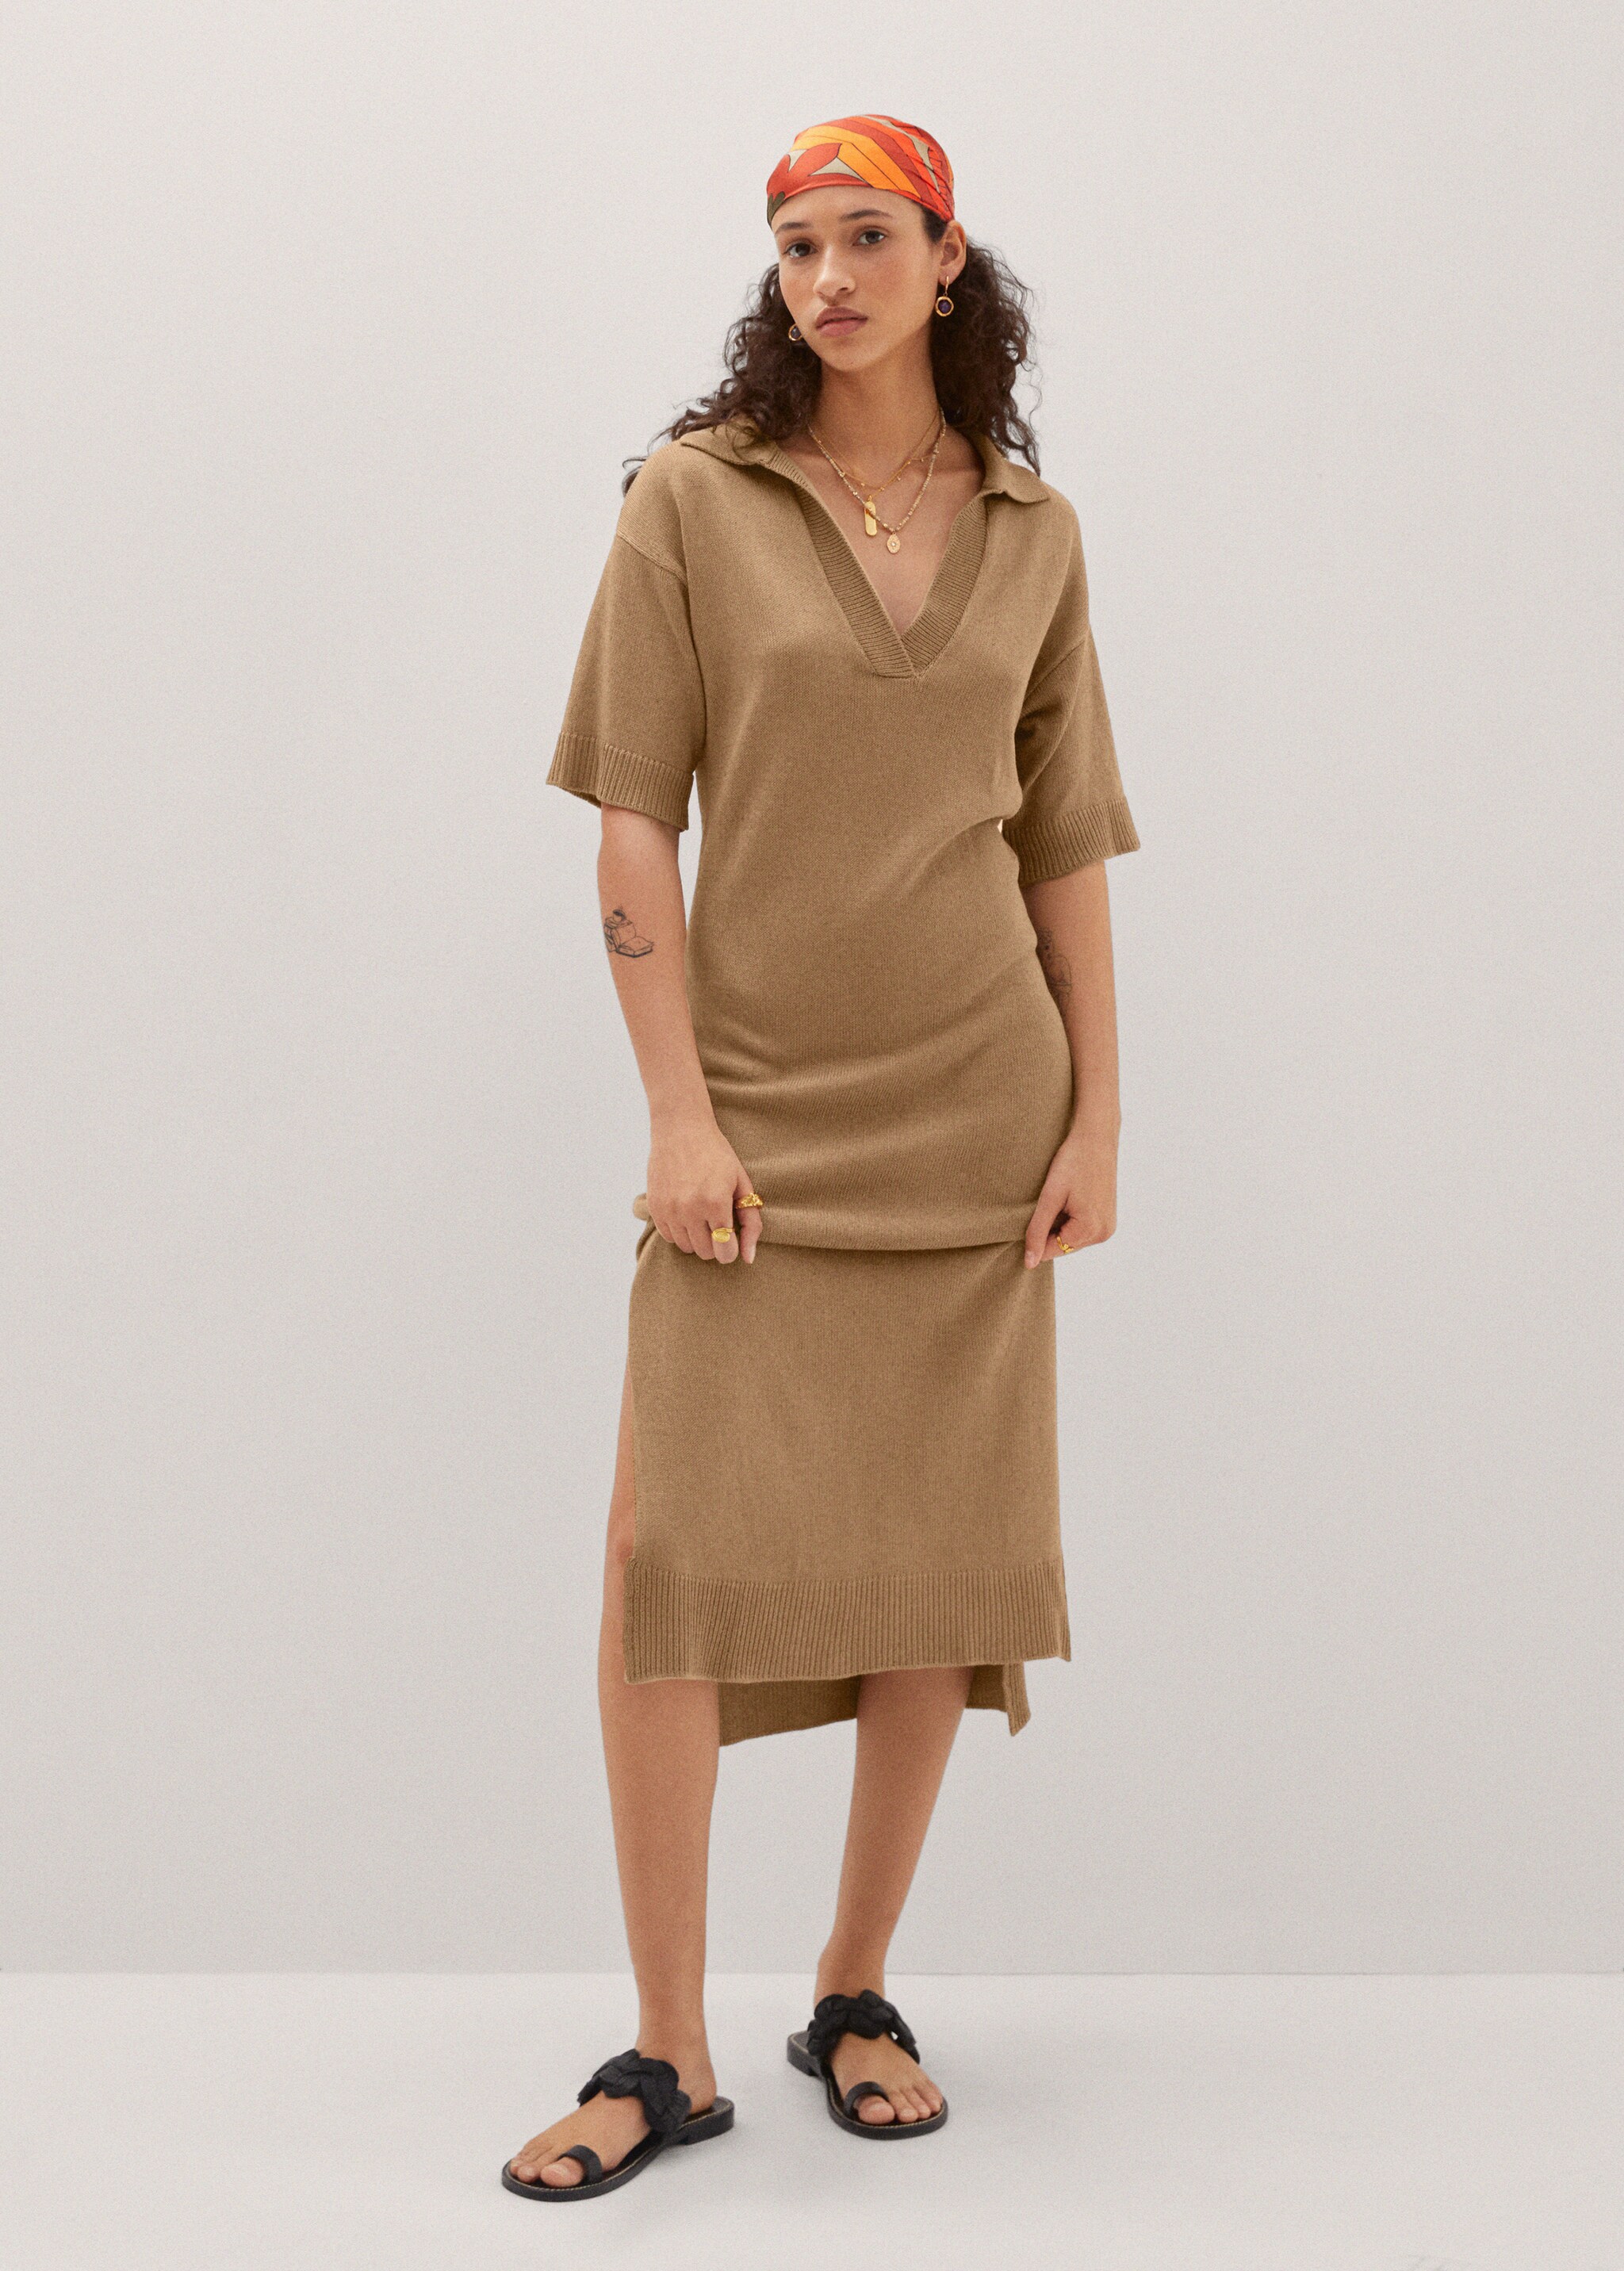 Knitted dress with openings - General plane